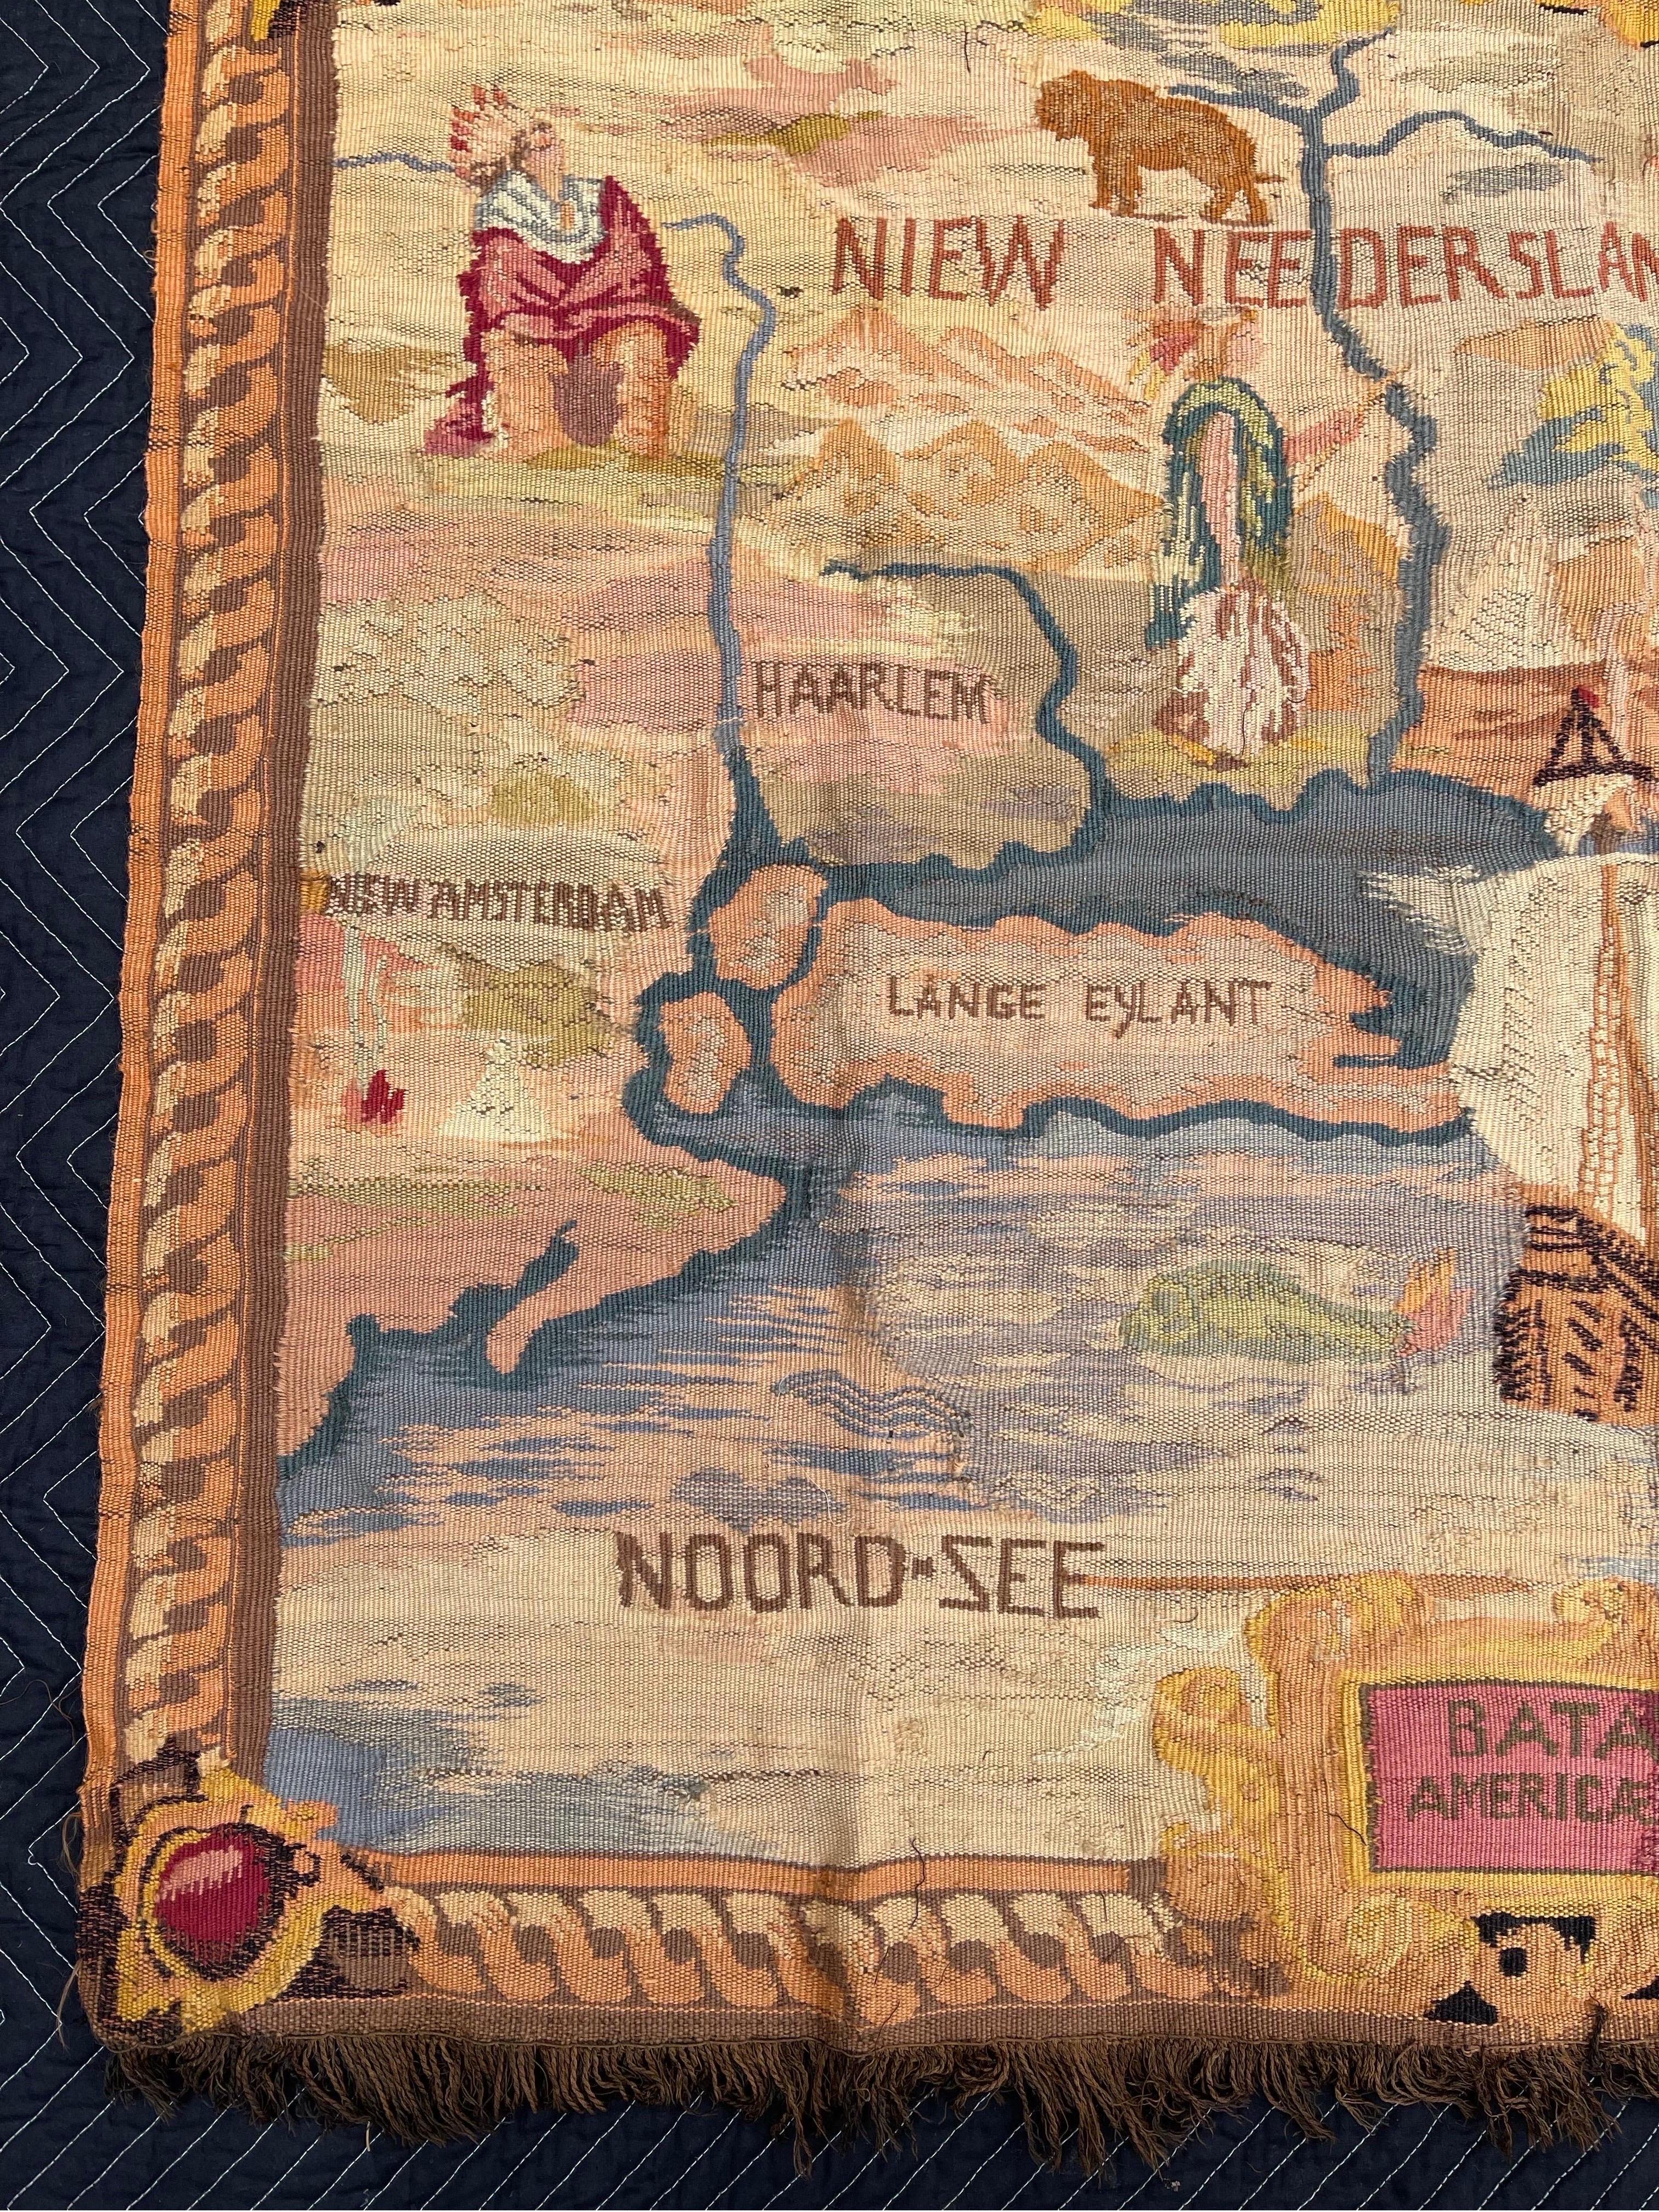 20th Century c.1900 Handwoven French Tapestry Map New Netherlands, Amsterdam, 1626 New York For Sale